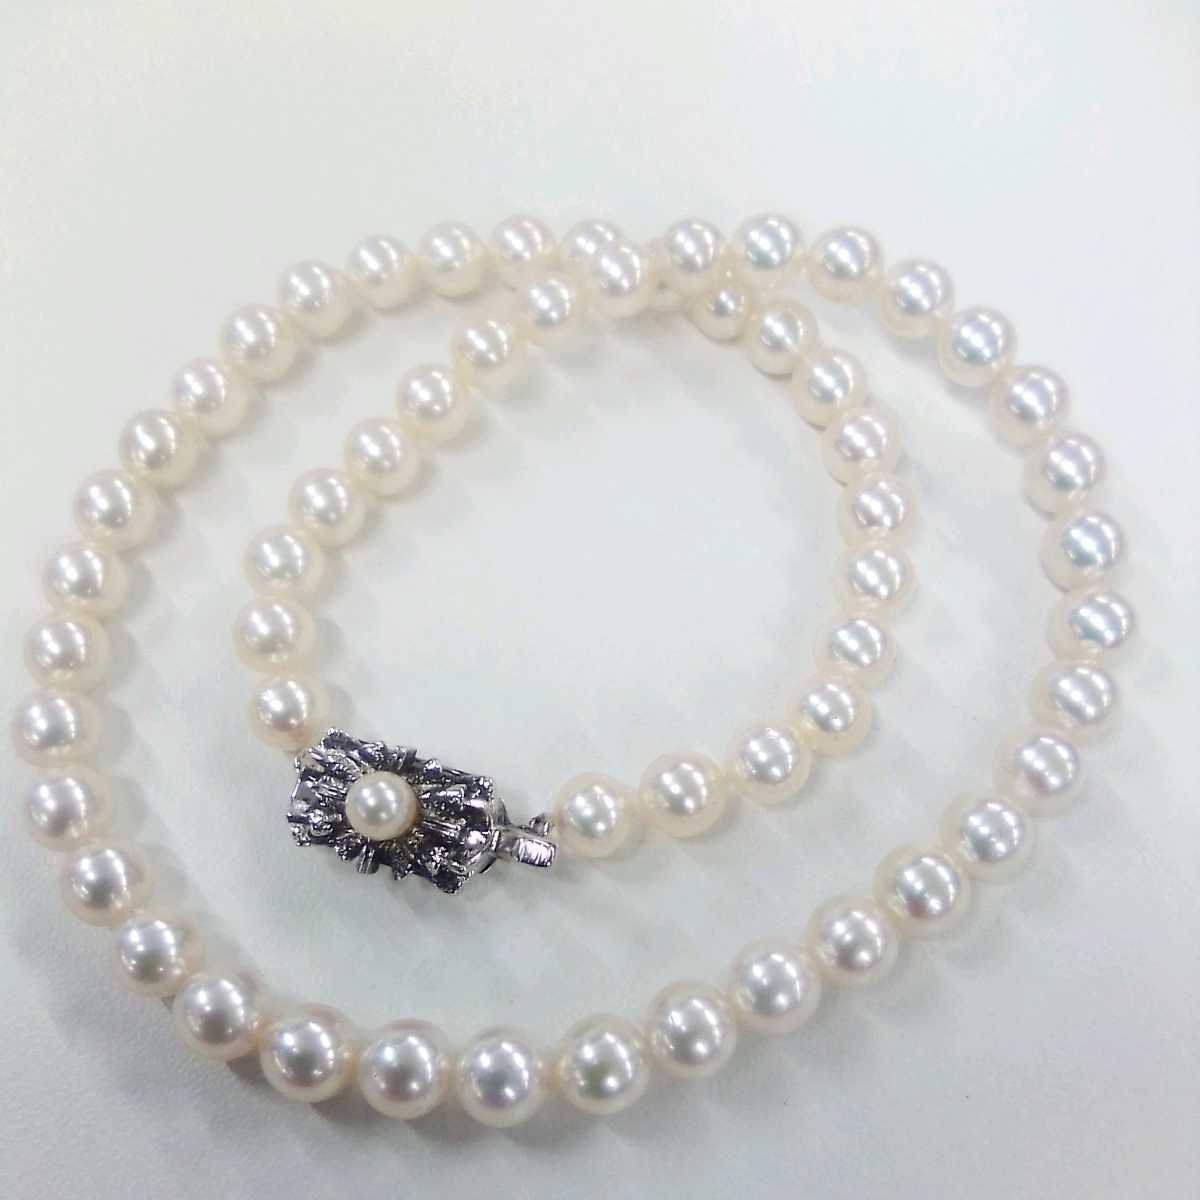 * is 3350H*...book@ pearl pearl necklace 40 centimeter 6.6-7 millimeter . rom and rear (before and after) catch SILVER stamp equipped * postage included *